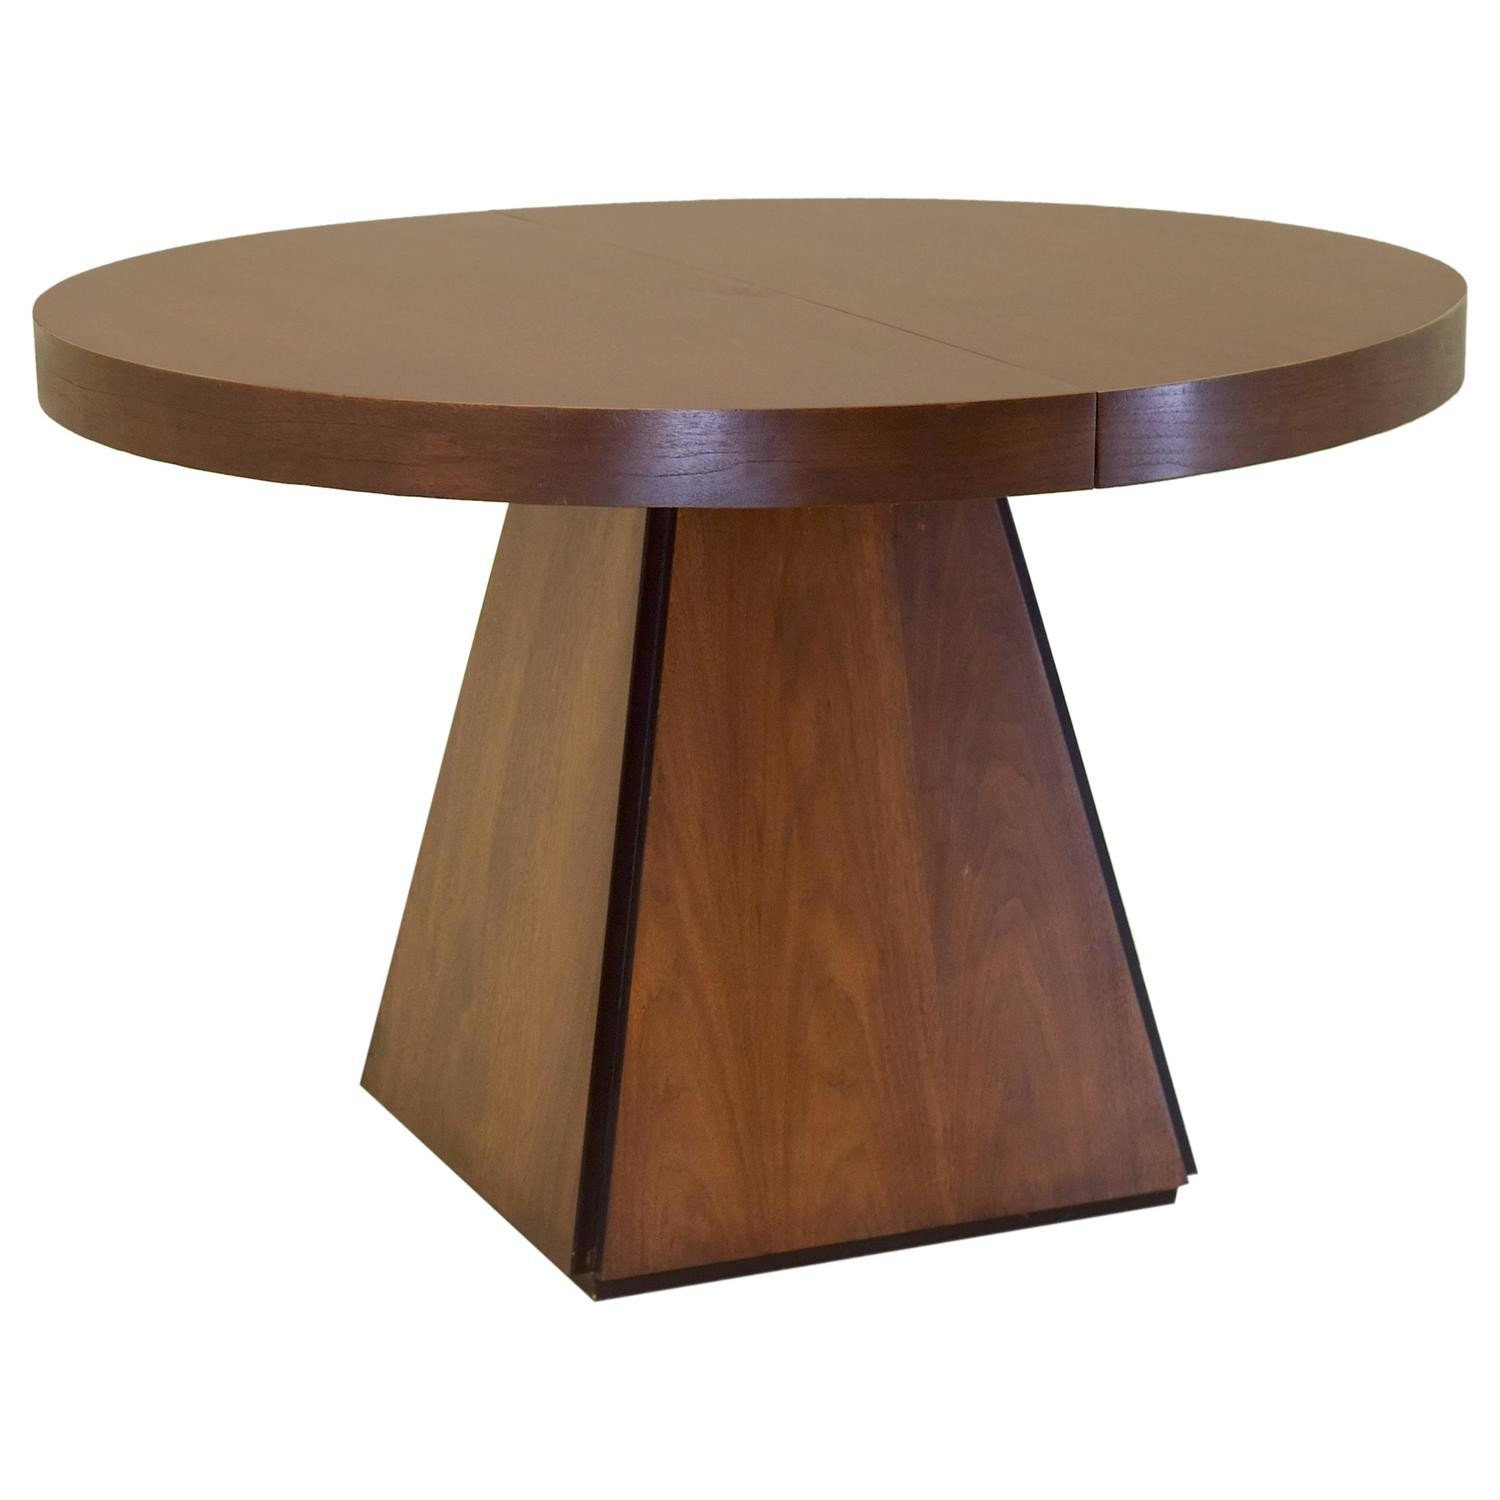 Pierre cardin round obelisk dining table in walnut with